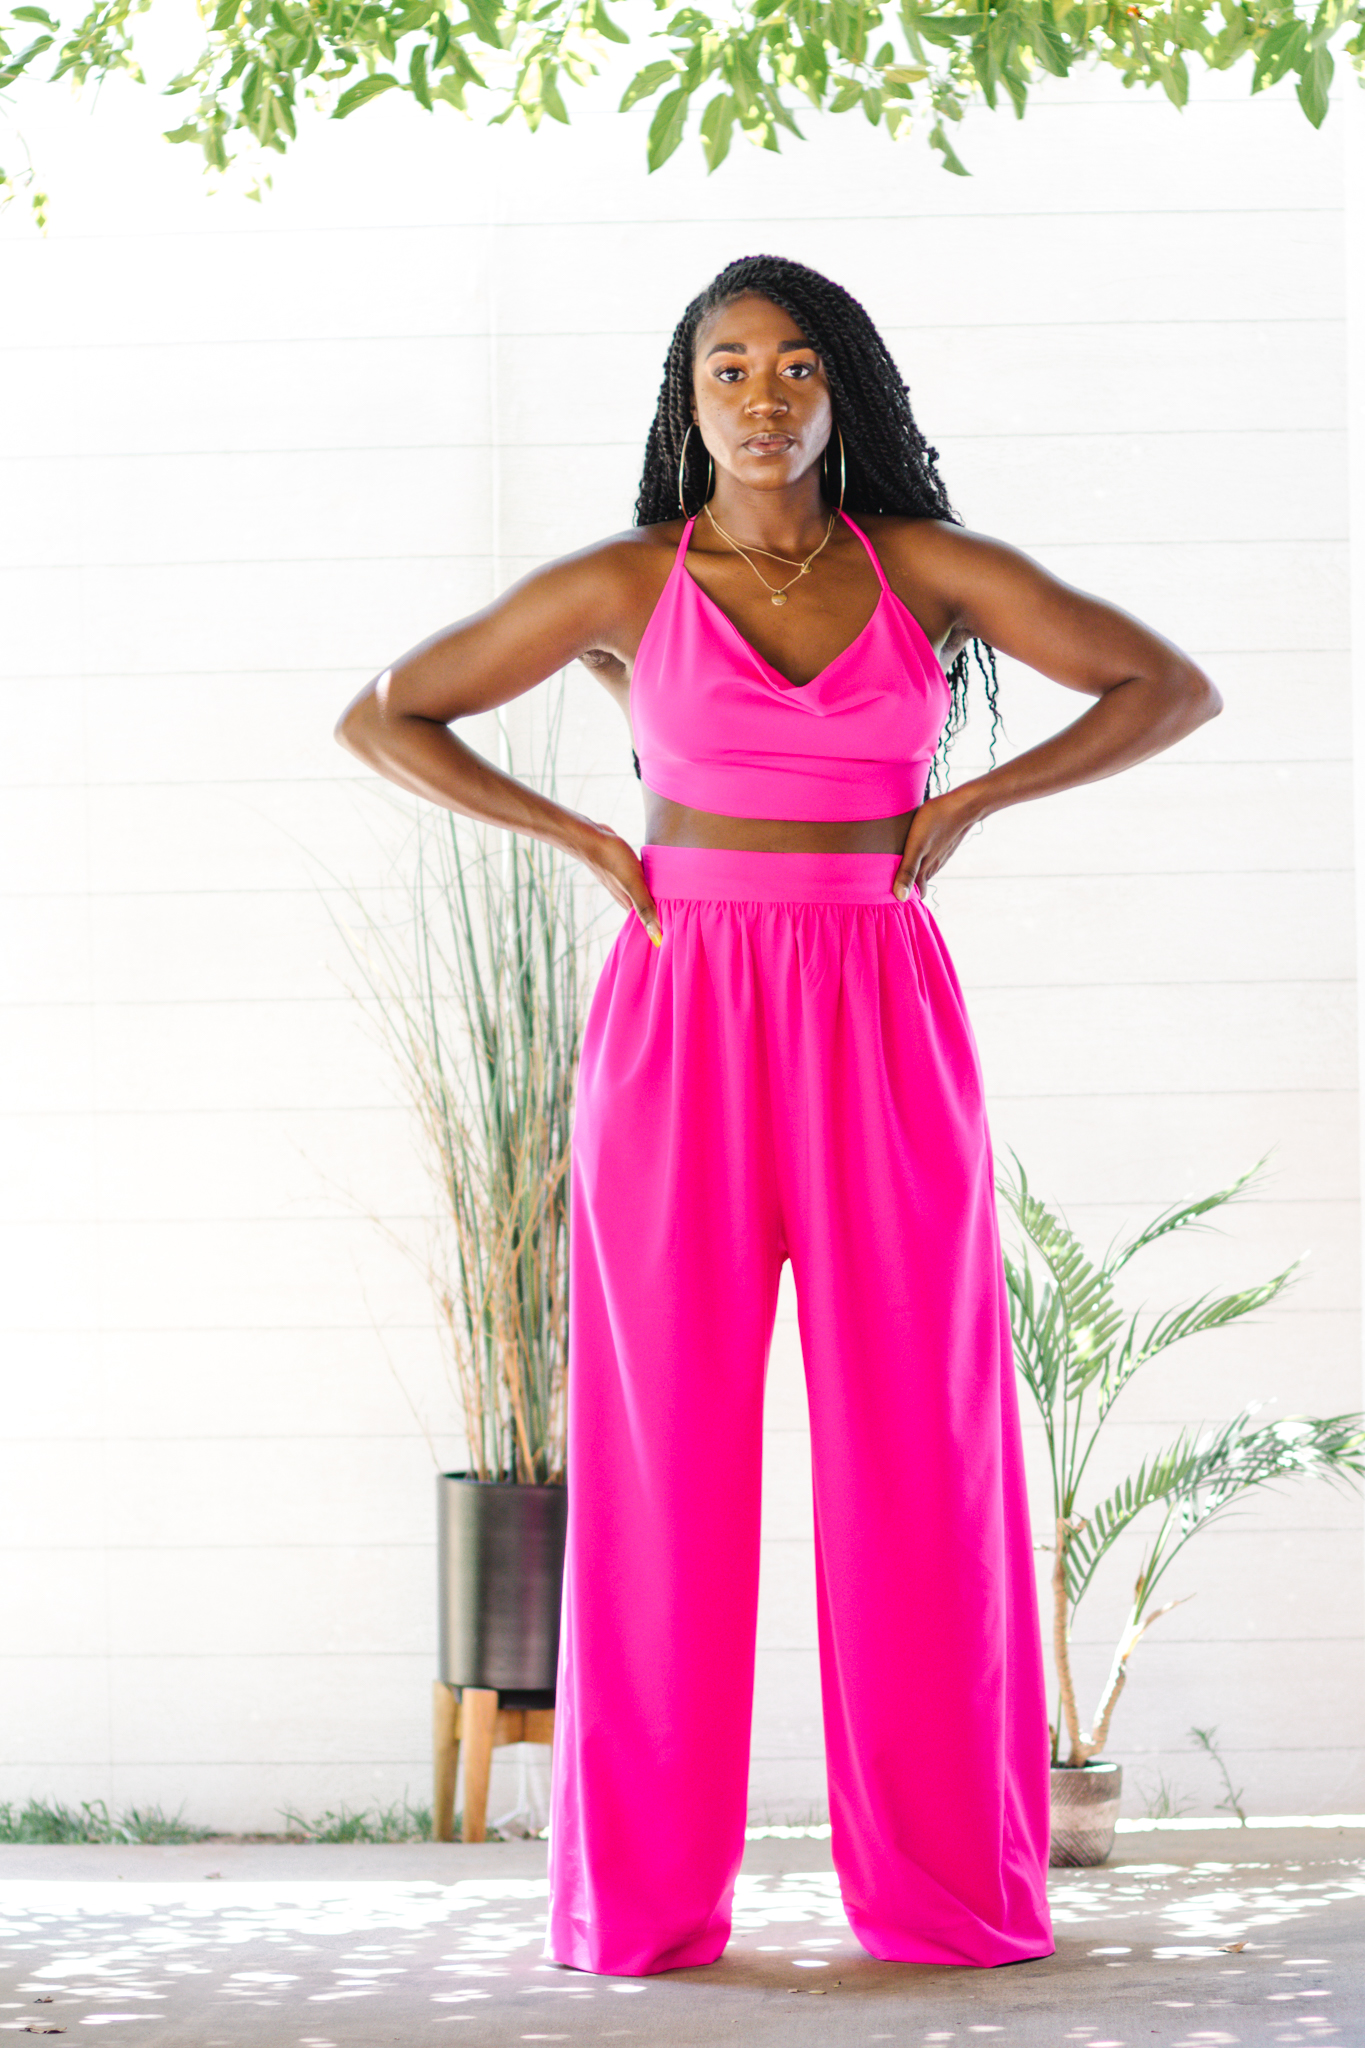 https://montoyamayo.com/wp-content/uploads/2021/08/DIY-Neon-pink-back-out-cowl-top-and-wide-leg-pants-Simplicity-8605-S8605-8.jpg